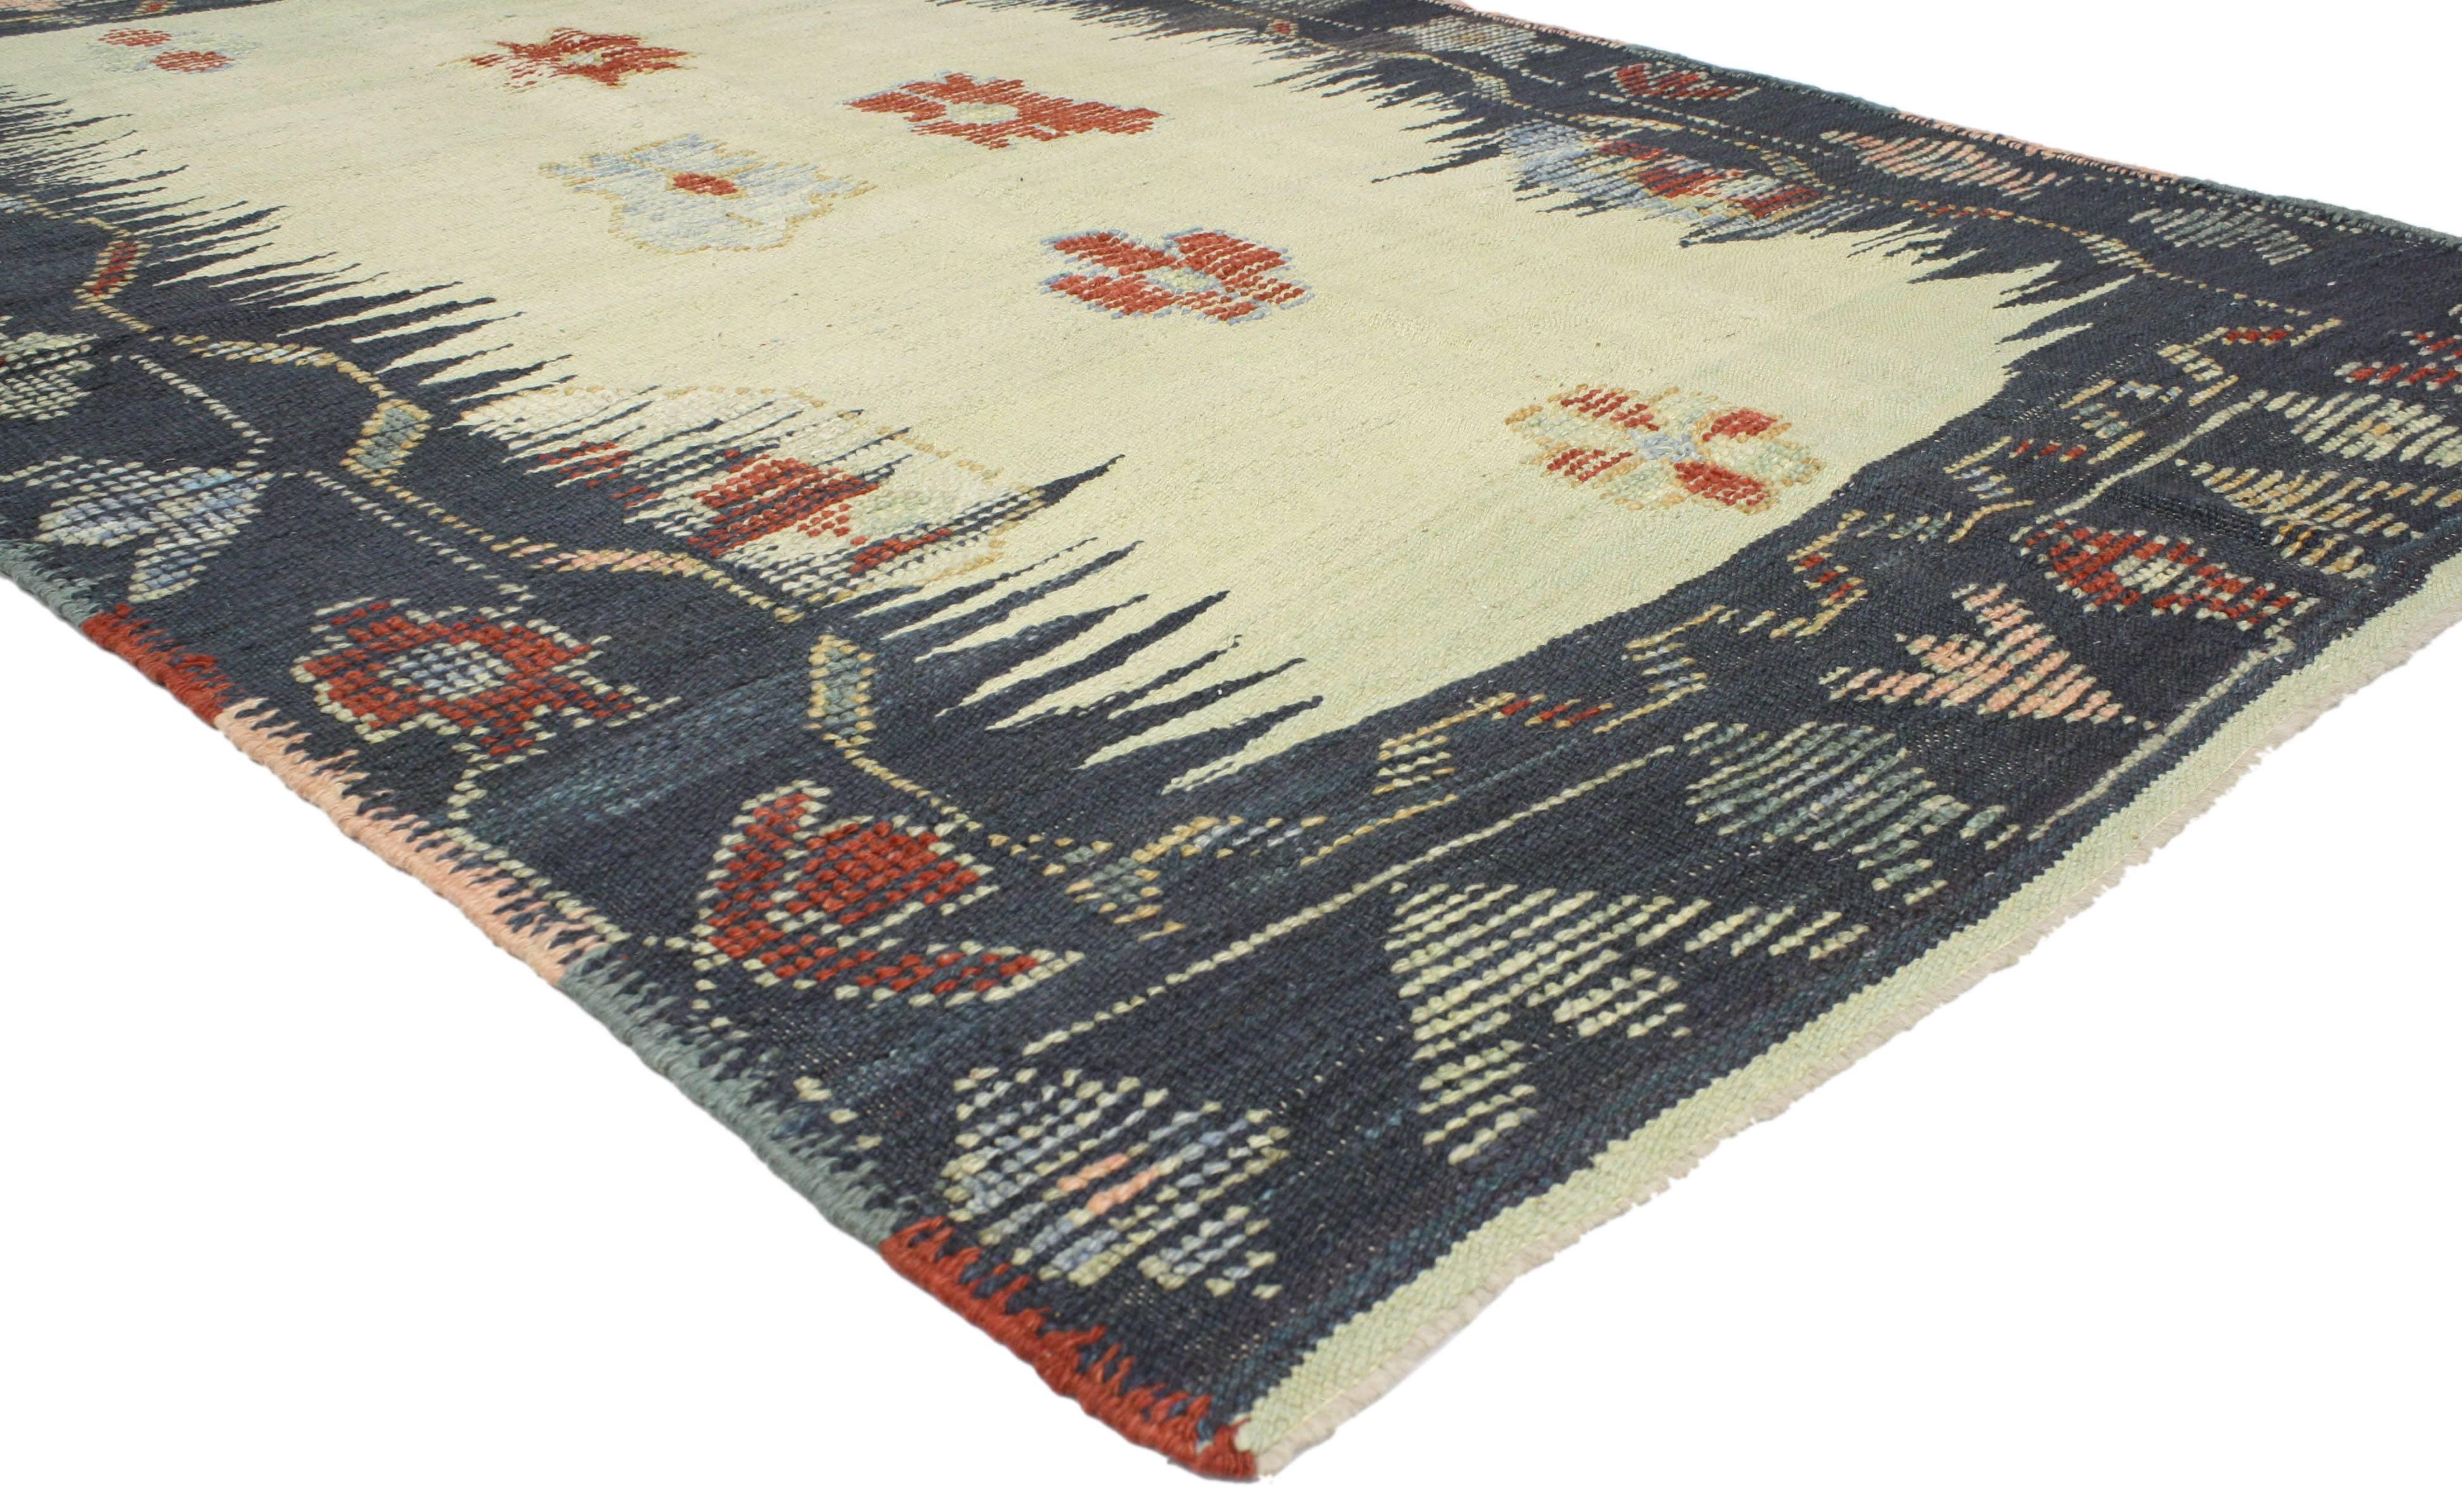 52201 Turkish Kilim Rug with Large-Scale Geometric Pattern and Nomadic Tribal Style, 05'05 x 08'05. This new Turkish Kilim rug has subtle textures for the most part – aside from the stunning tribal-style. Featuring a distinctive tribal design with